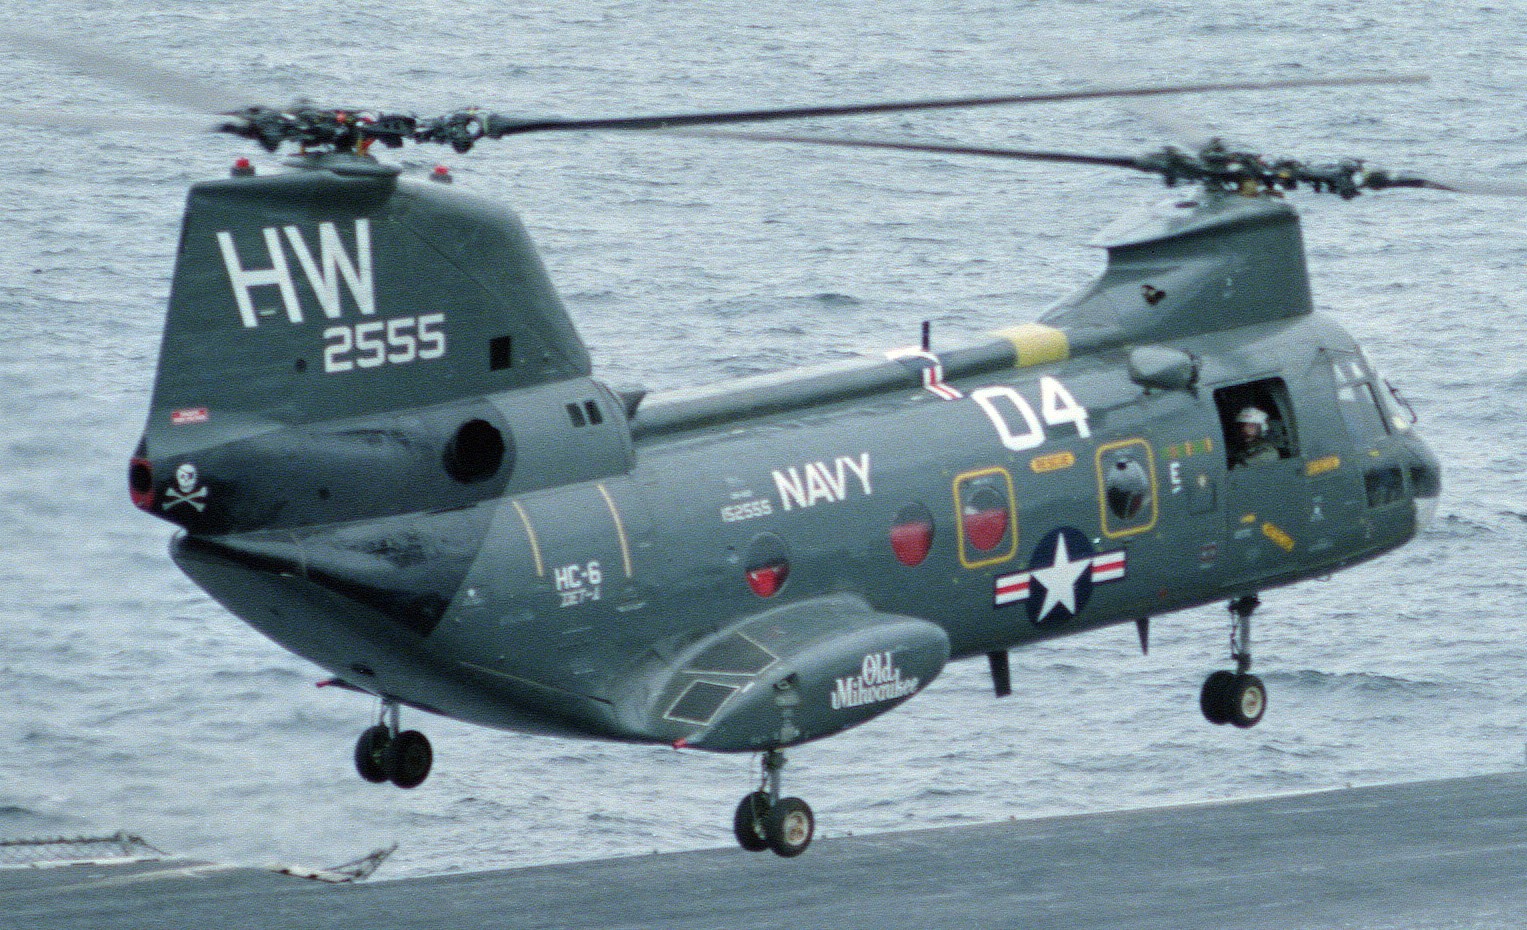 hc-6 chargers helicopter combat support squadron navy ch-46 sea knight 60